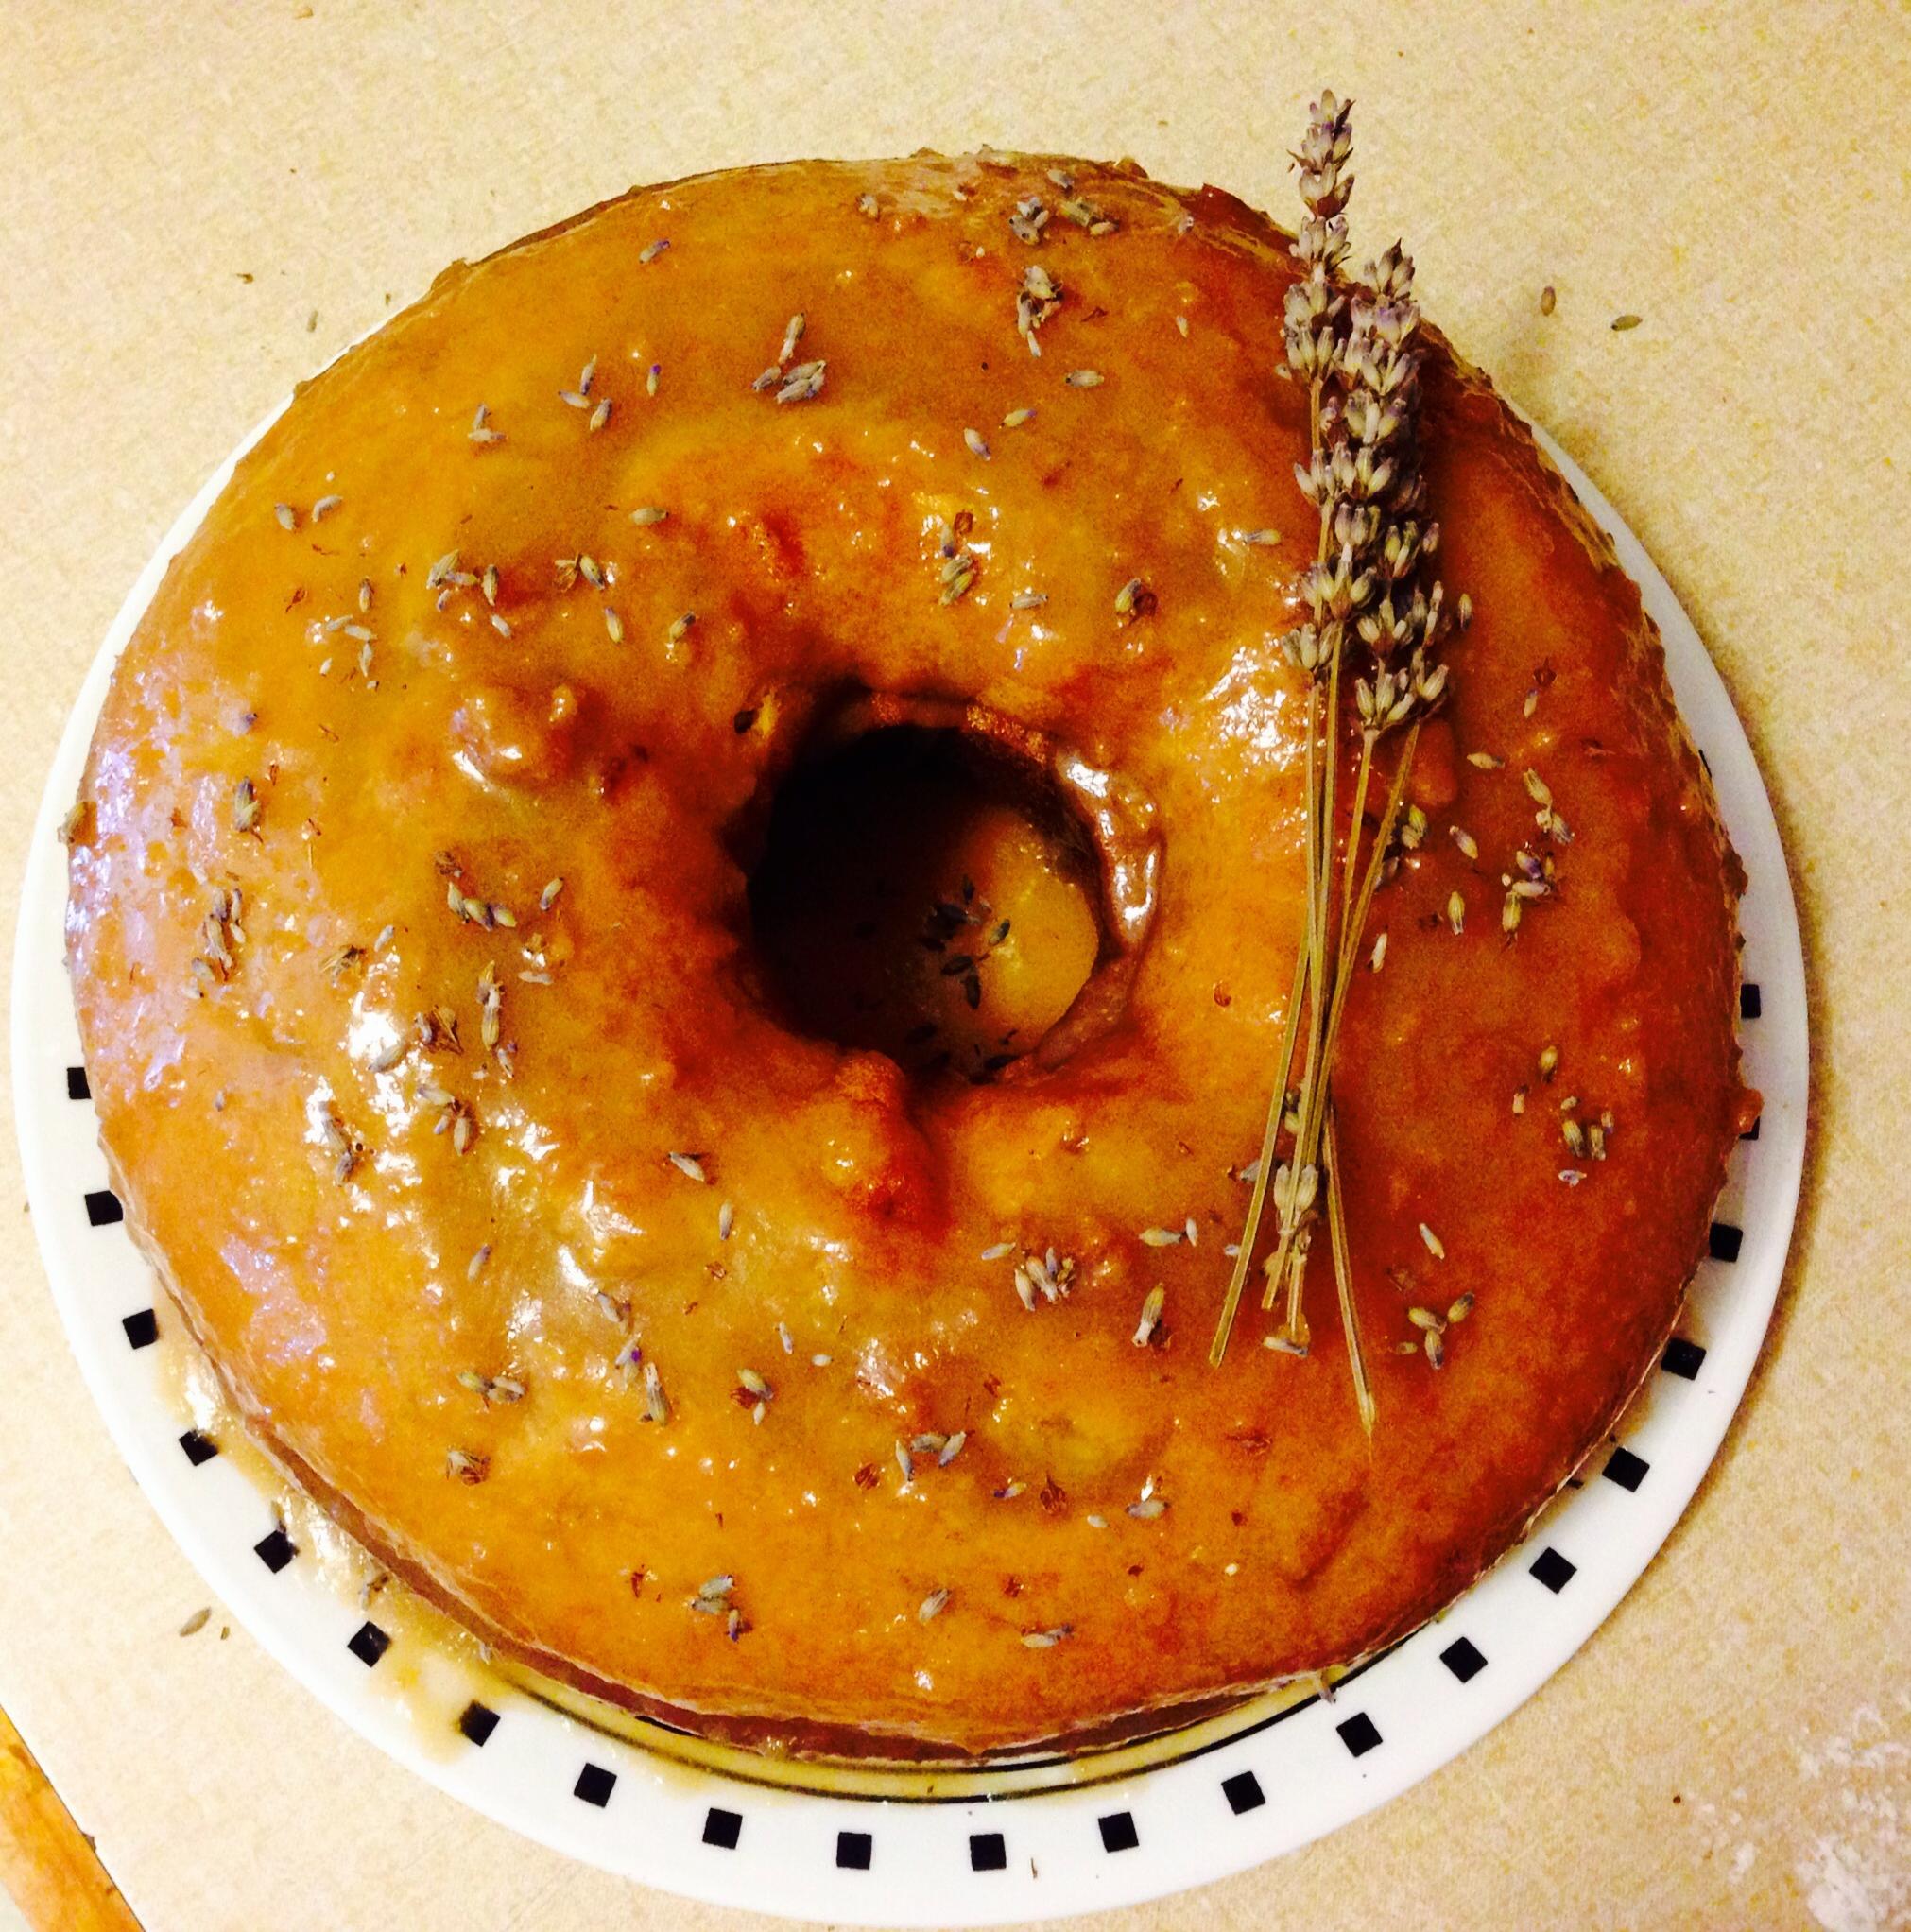  Behold the sweet and fragrant Garden Lavender Pound Cake!